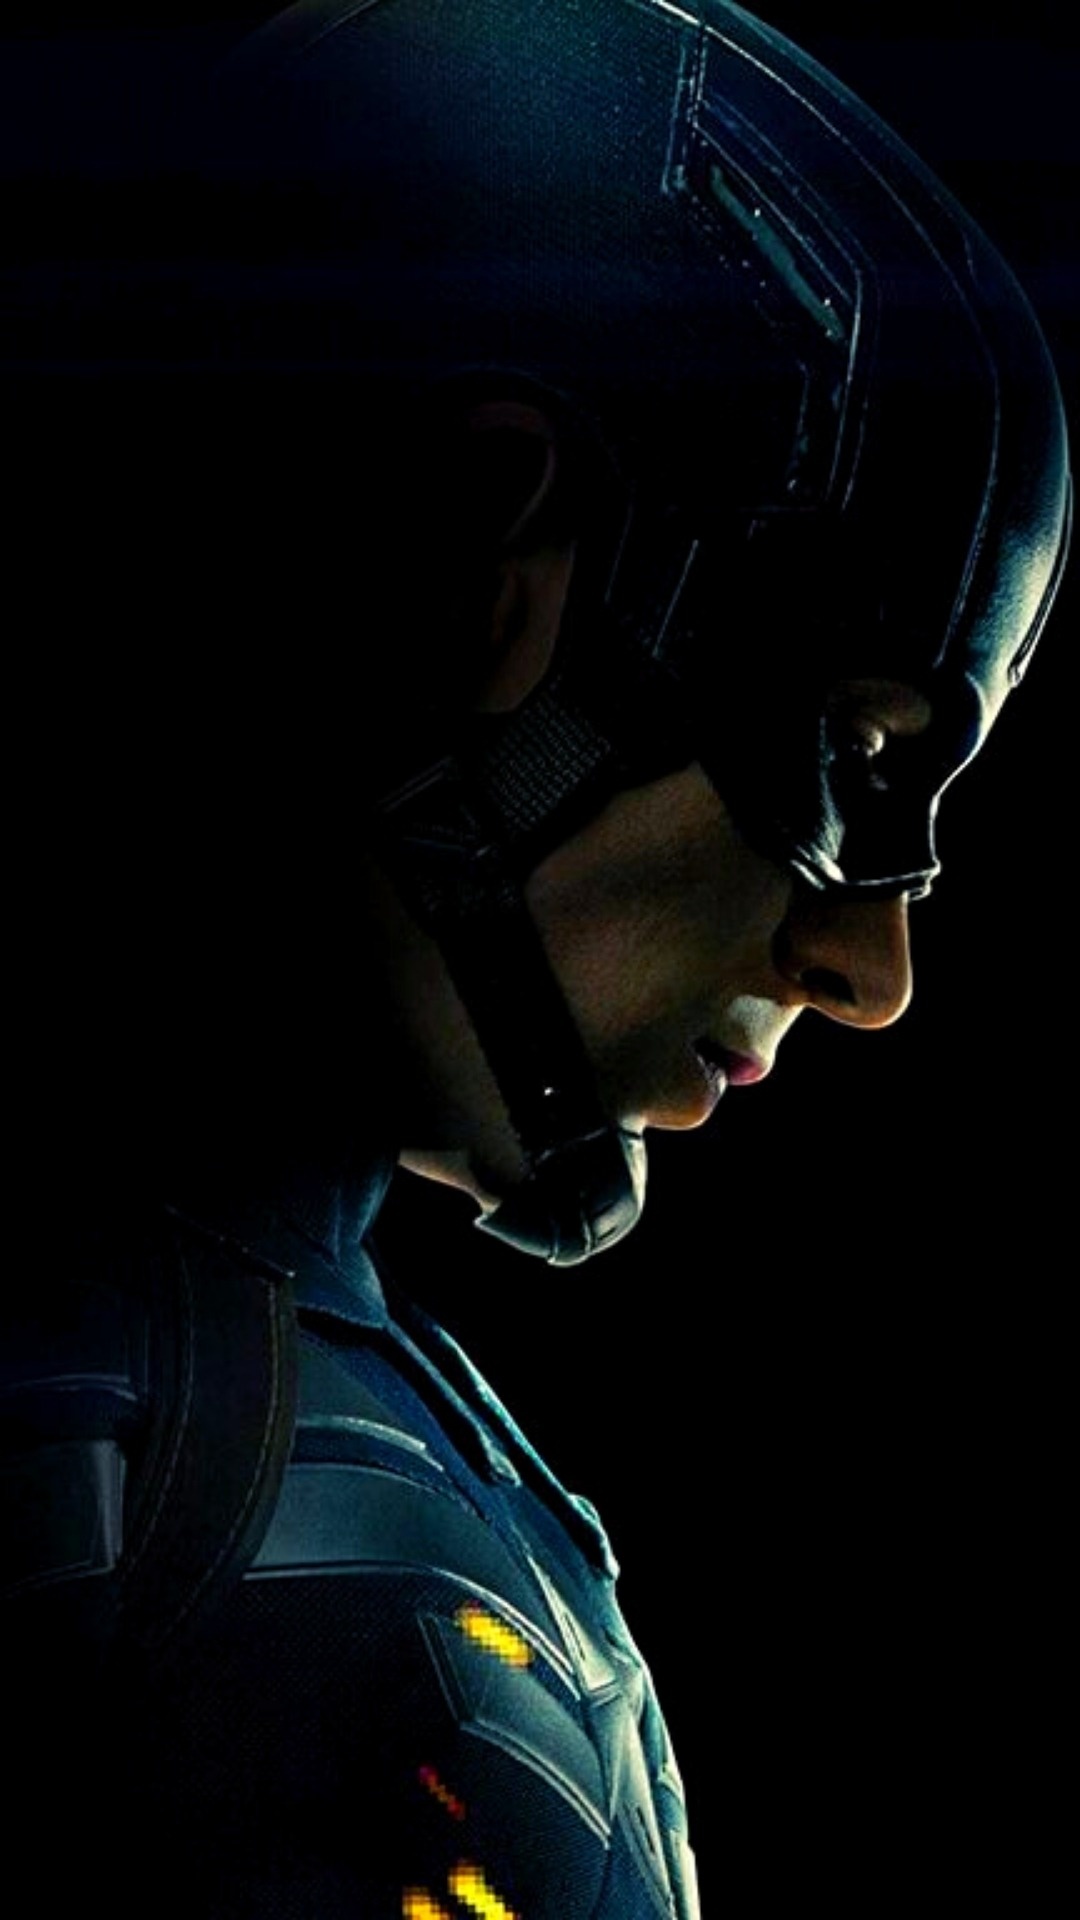 Captain America: A frail young man who was transformed into a super-soldier after being injected with a serum. 1080x1920 Full HD Wallpaper.